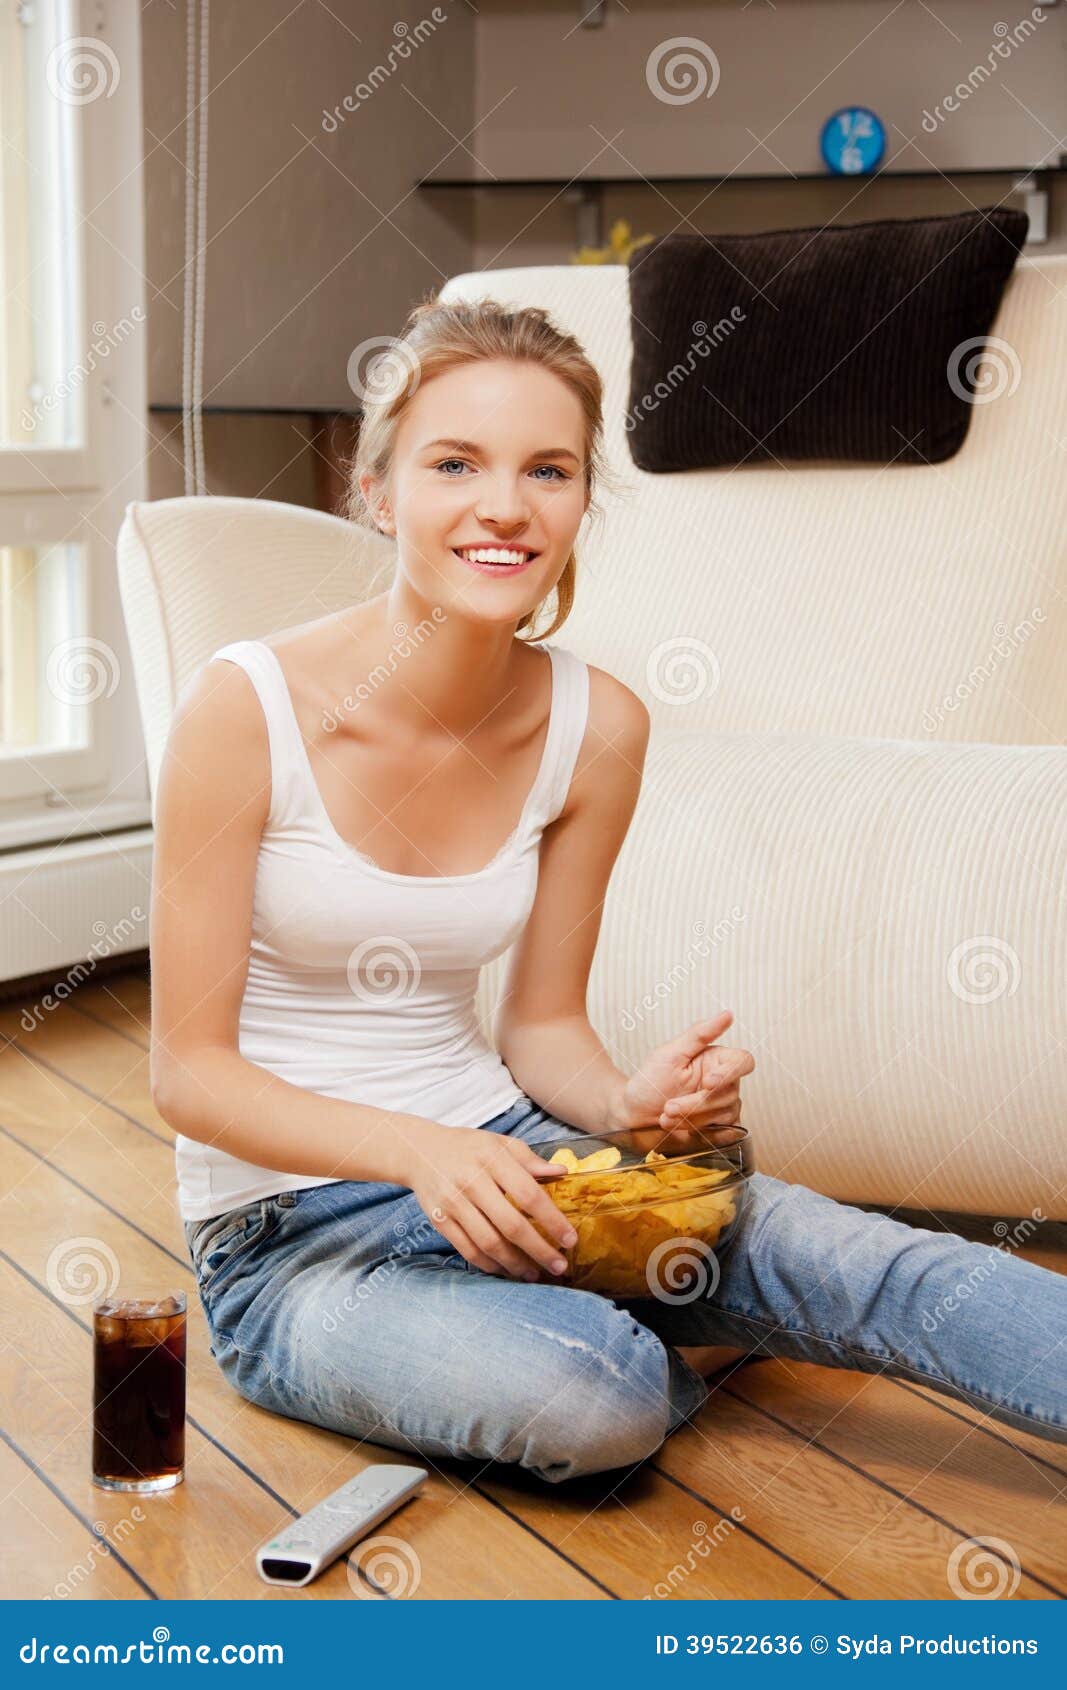 Smiling Teenage Girl With Remote